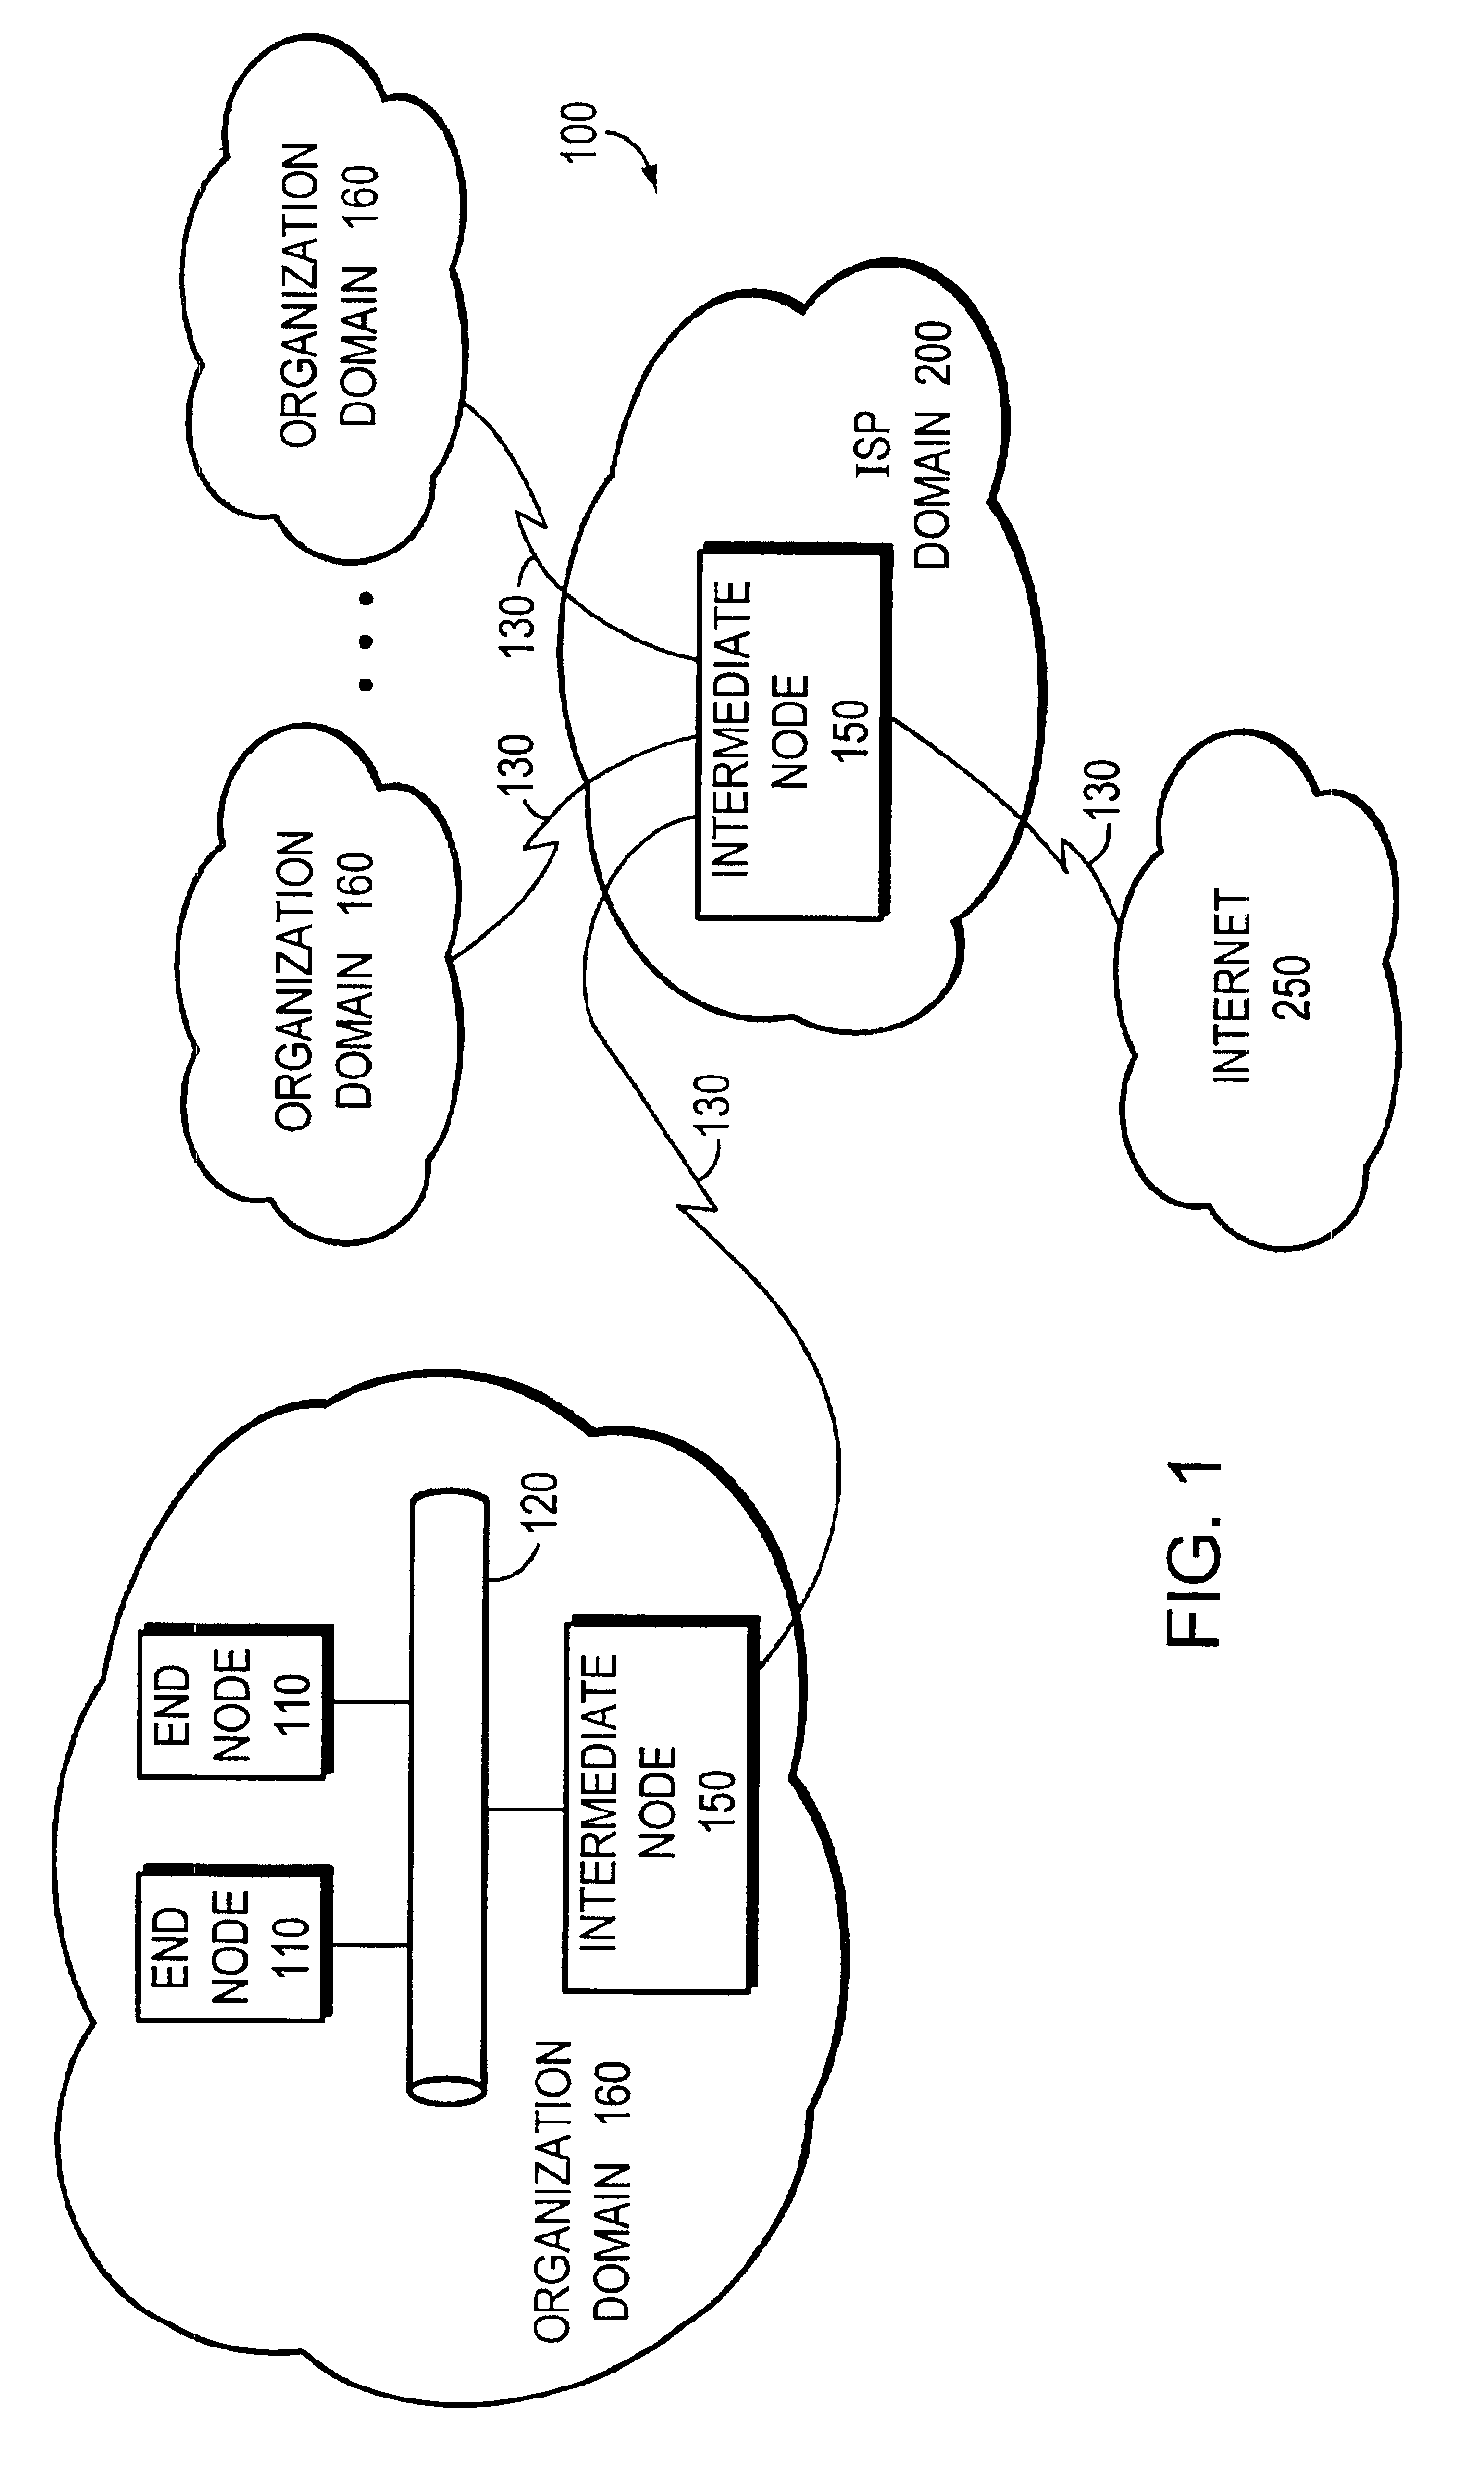 Coherent access to and update of configuration information in multiprocessor environment